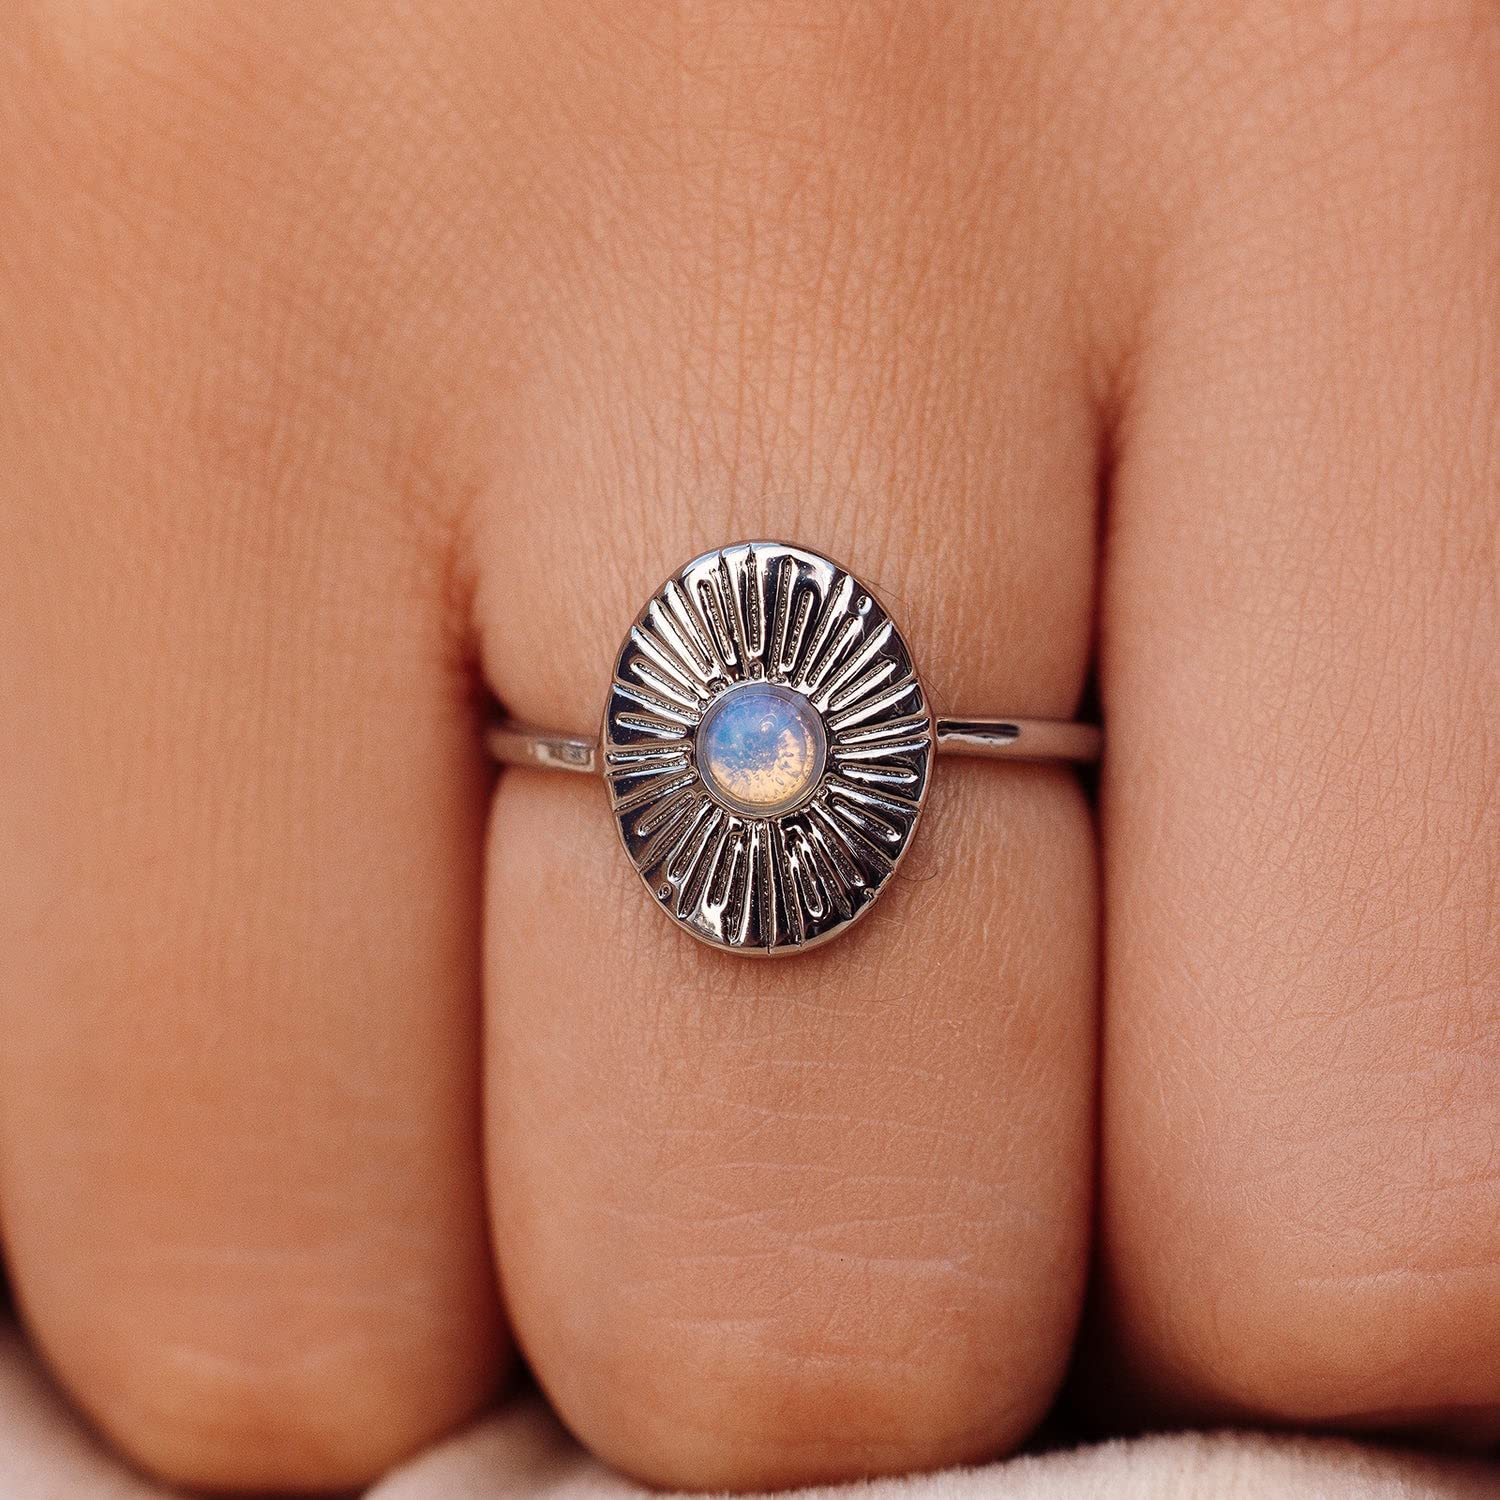 Pura Vida Ring Silver or Gold Plated Sun Ray Ring - Handmade Ring with Glass Opal Stone, Brass Base with Rhodium or Gold Plating - Cute Rings for Teen Girls, Boho Jewelry for Women - Size 5-9